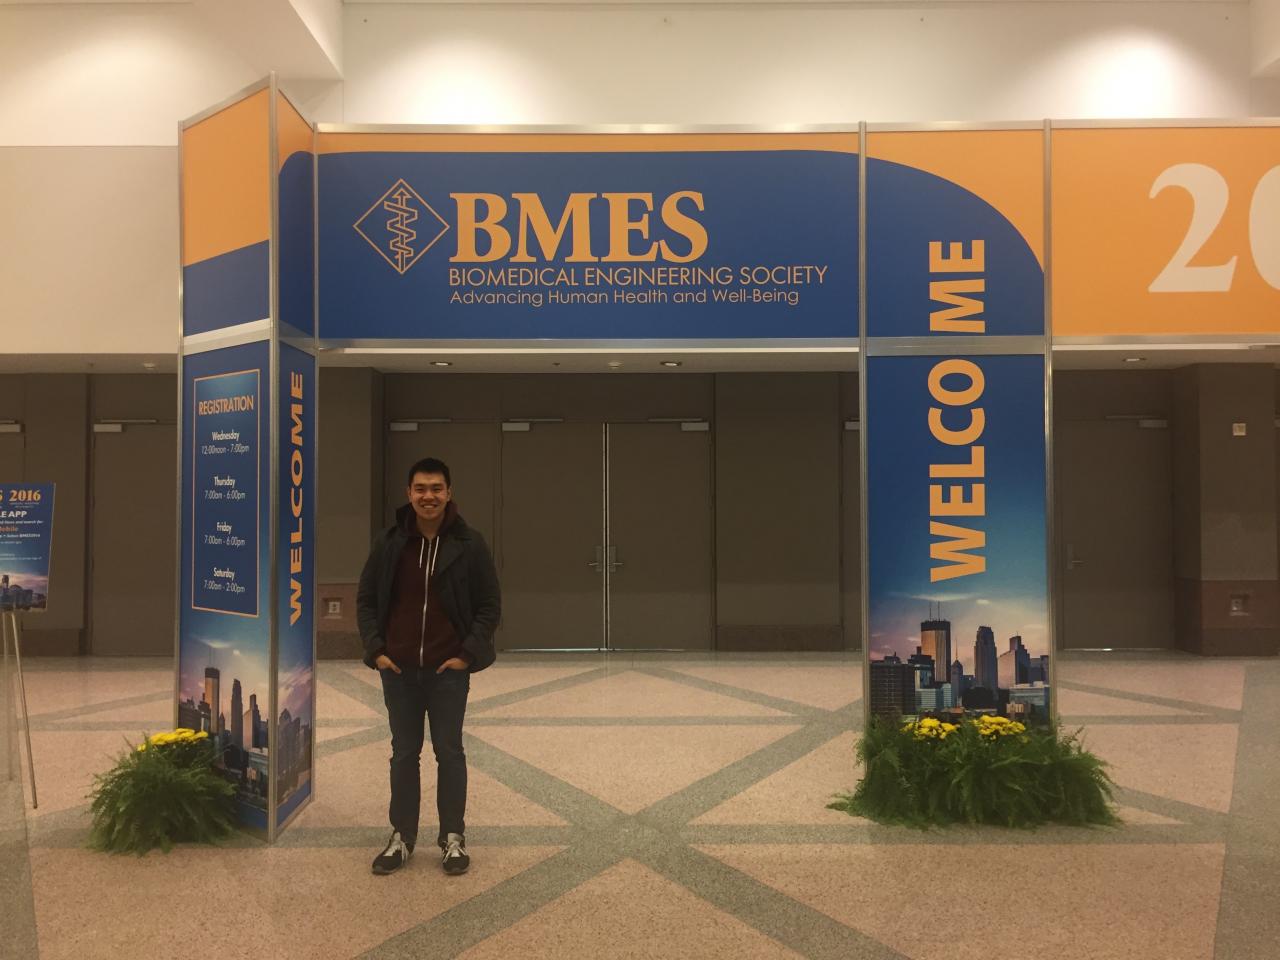 Mike at BMES.